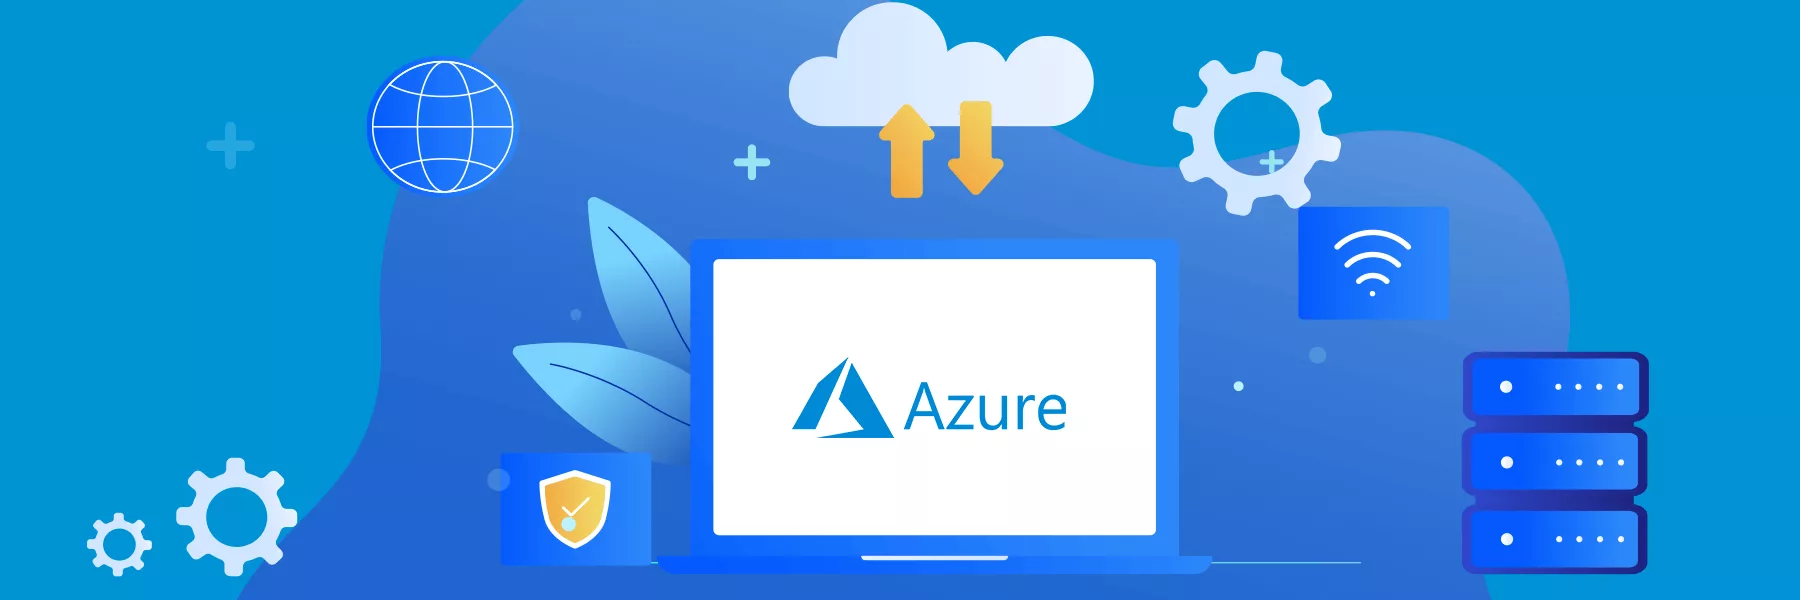 migrating your applications to azure: best practices and challenges